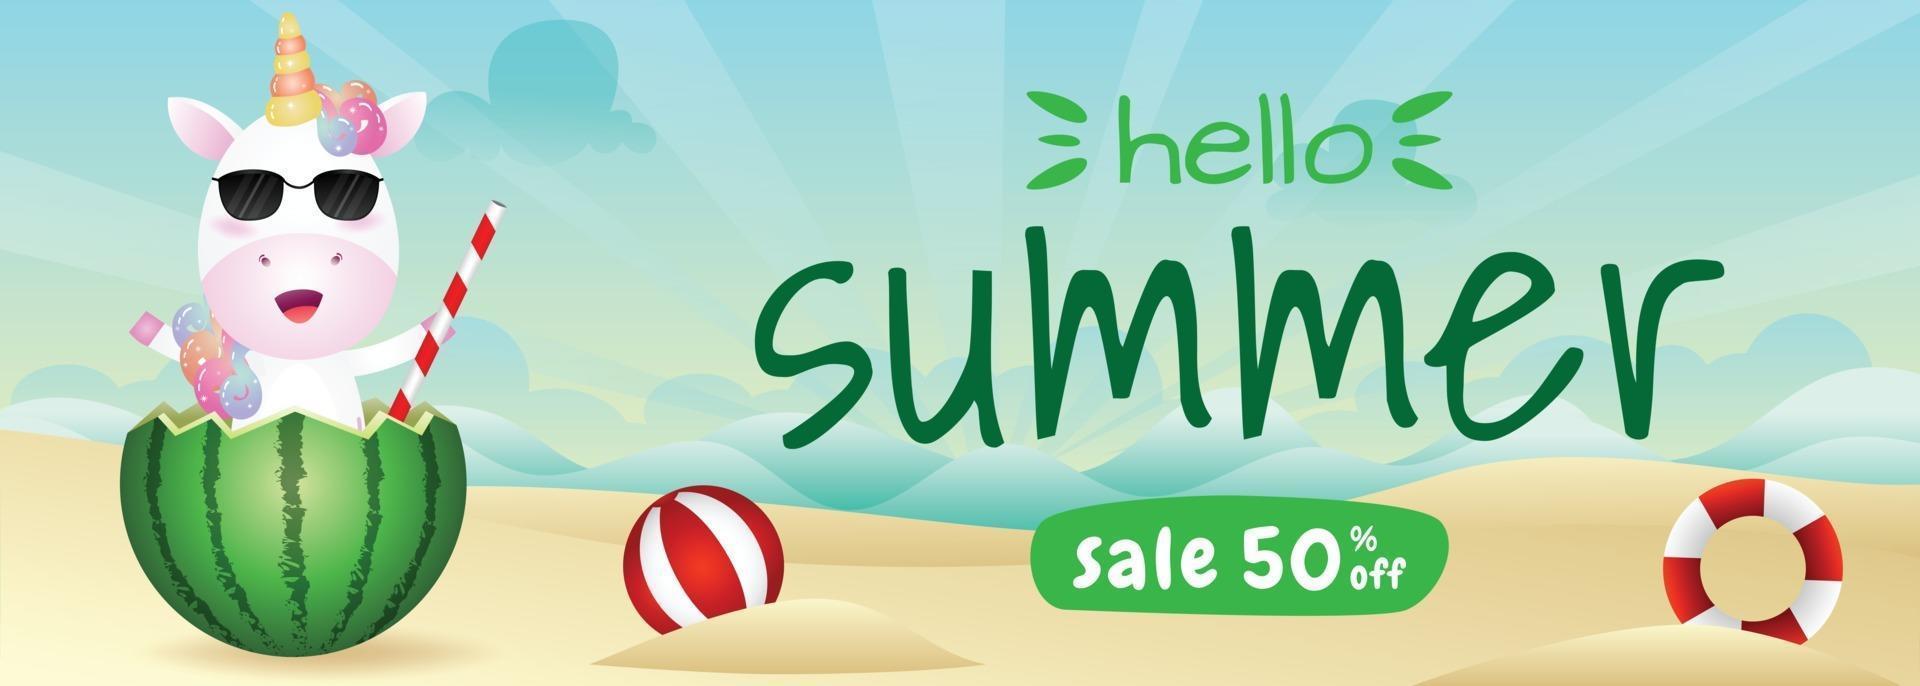 summer sale banner with a cute unicorn in the watermelon vector